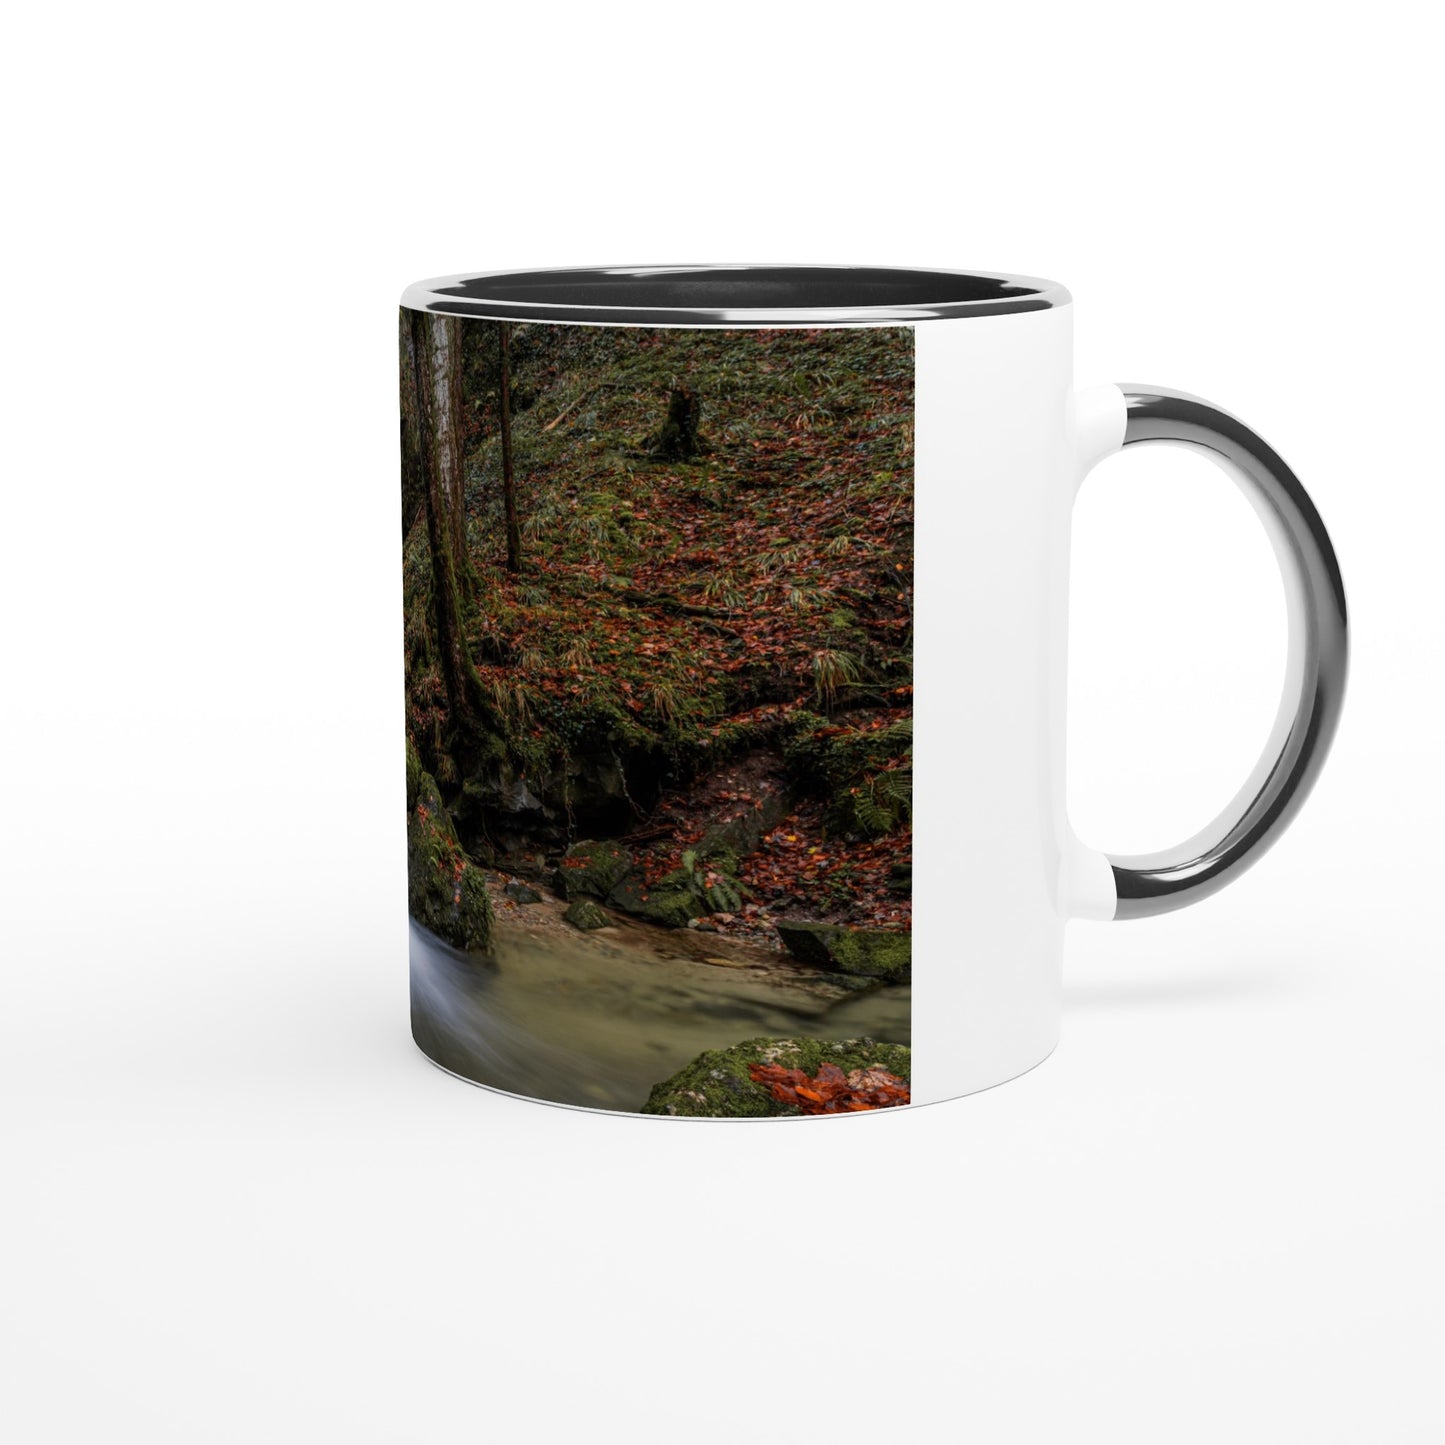 Autumnal waterfall - ceramic mug with color accents